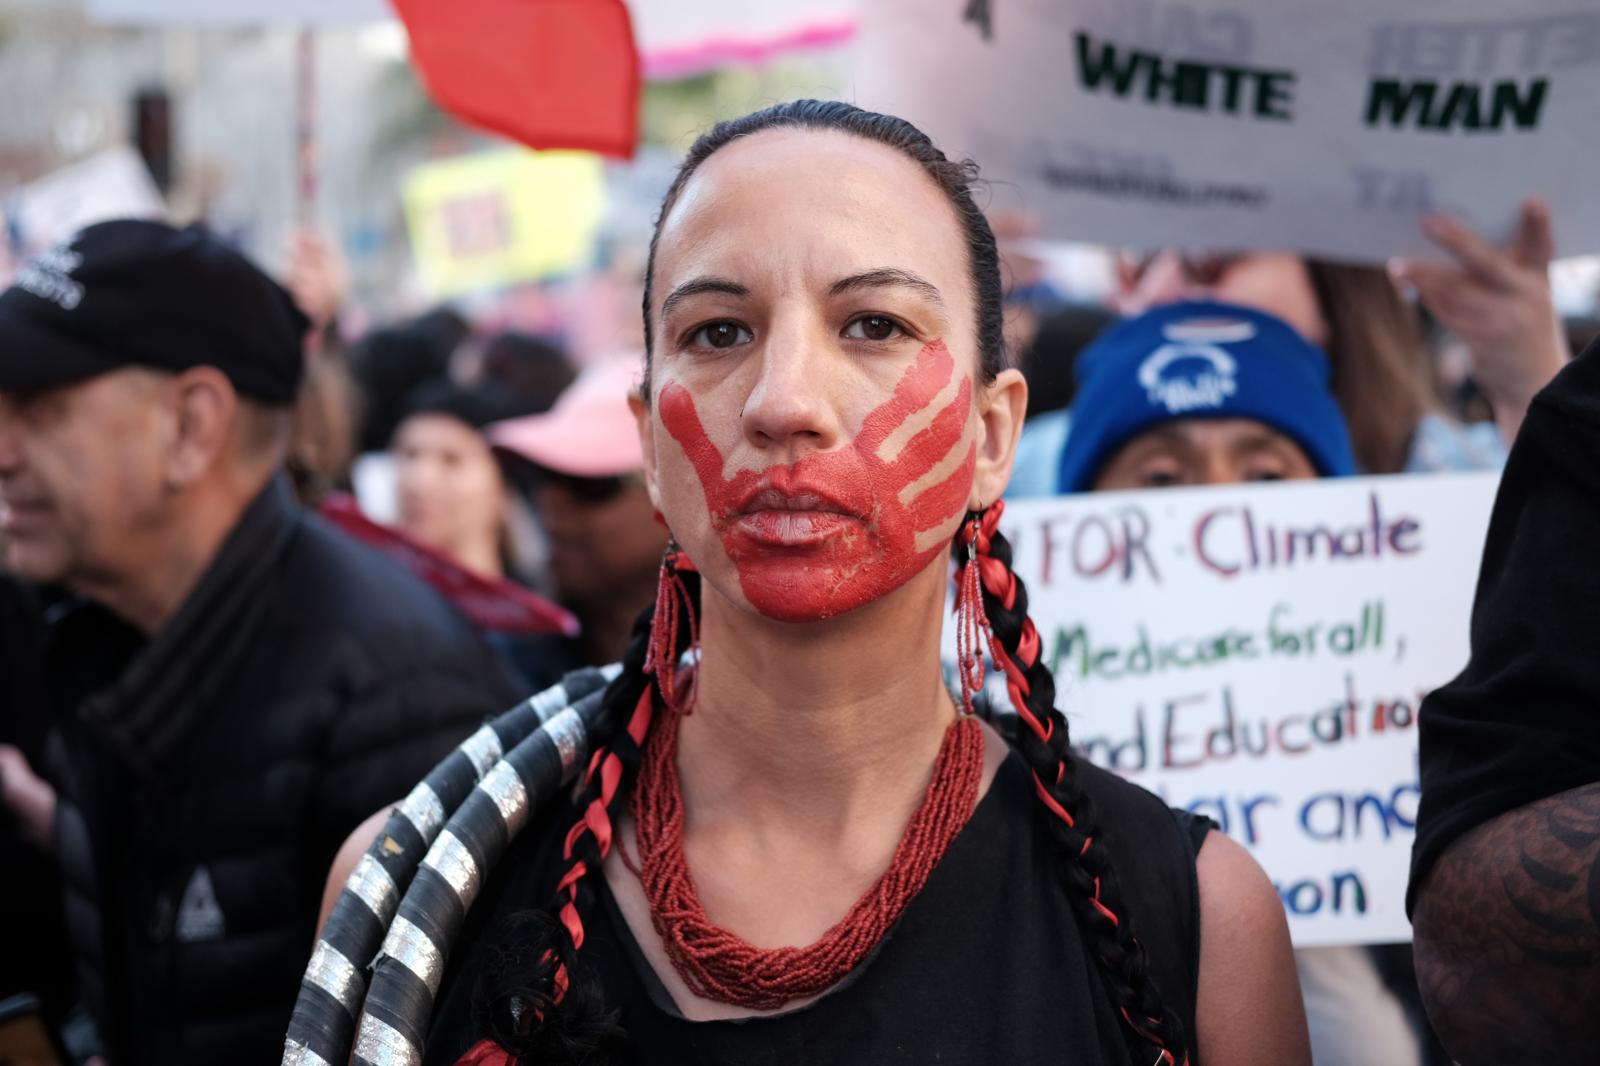 Image from REPORTAGE - LOS ANGELES, CALIFORNIA - JANUARY 18: An activist...